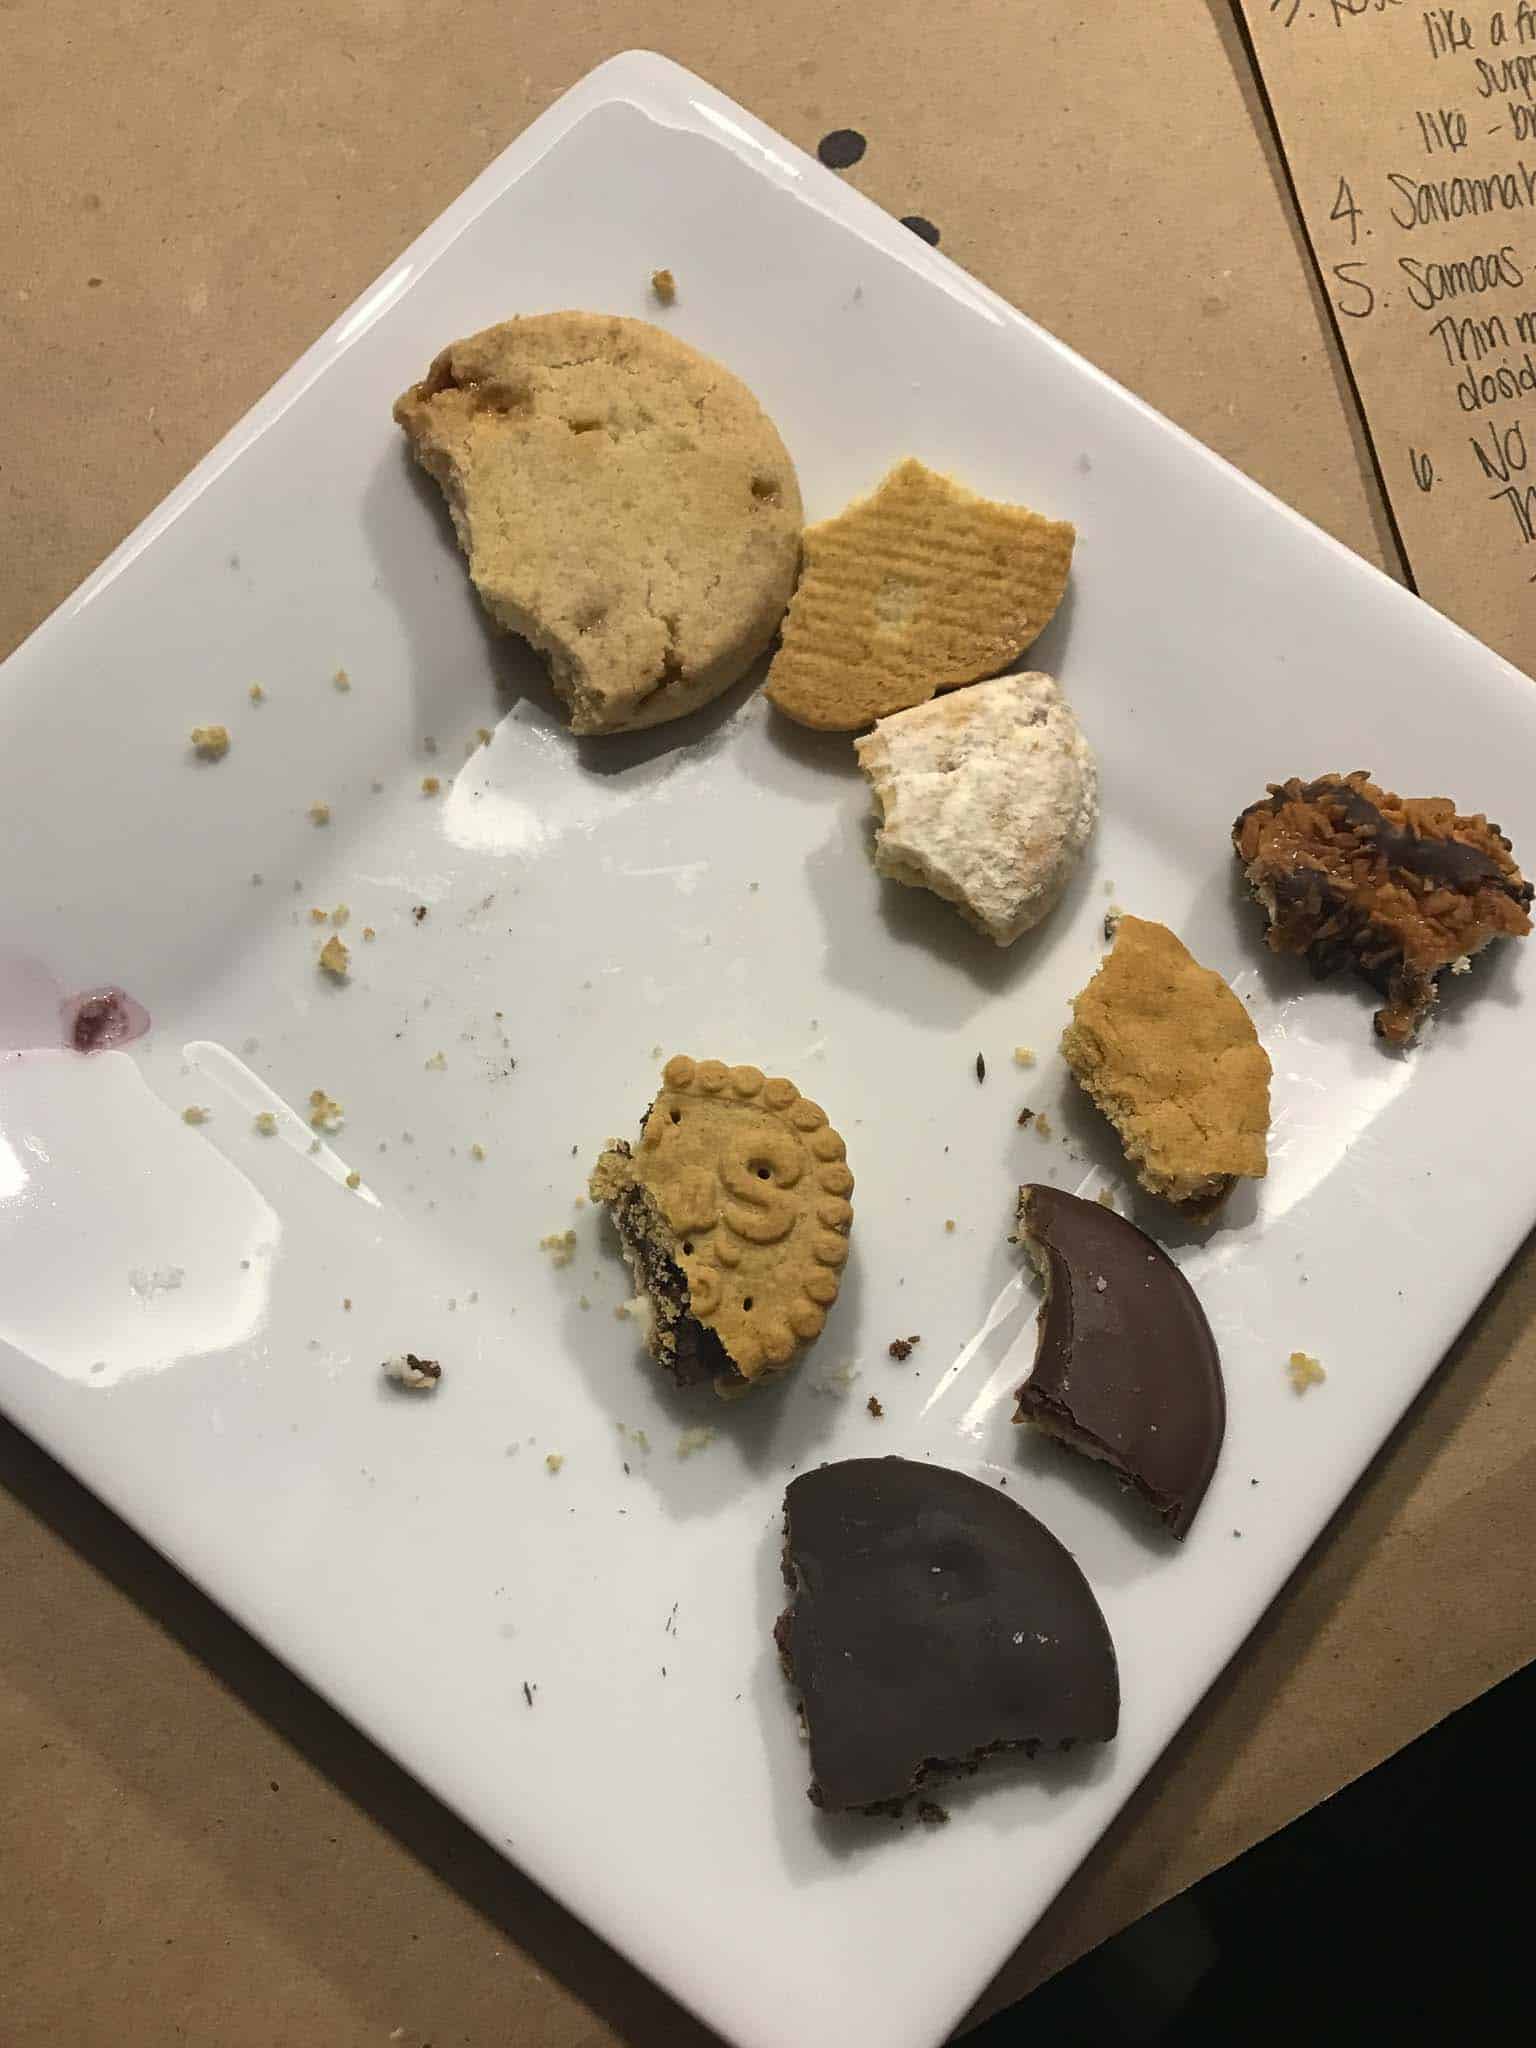 plate of Girl Scout cookies with small bites taken out of each one